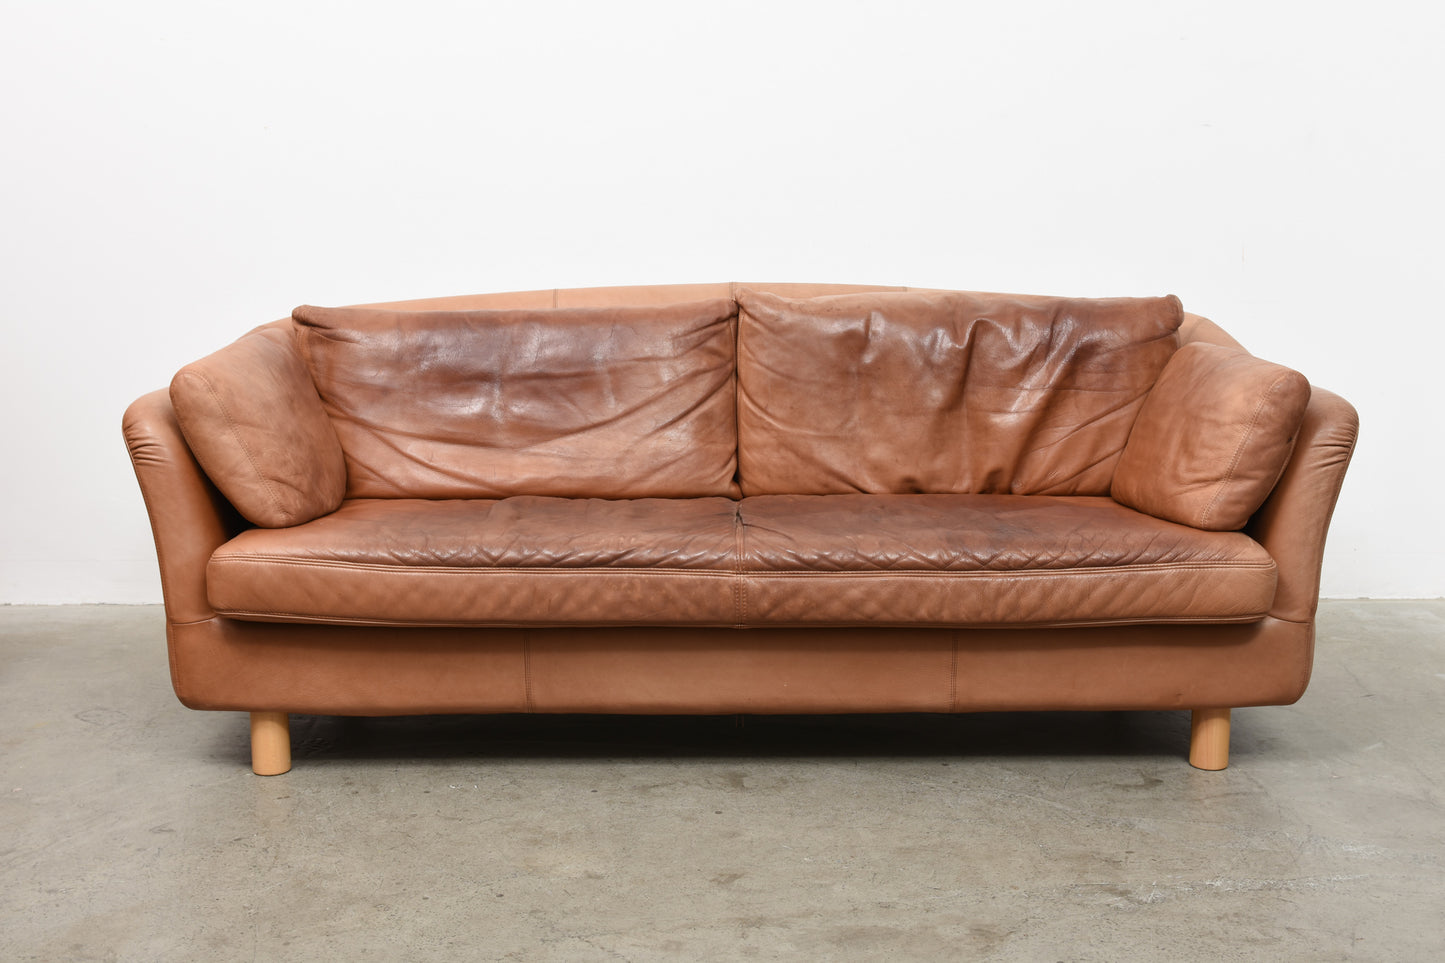 1980s leather sofa by Dux